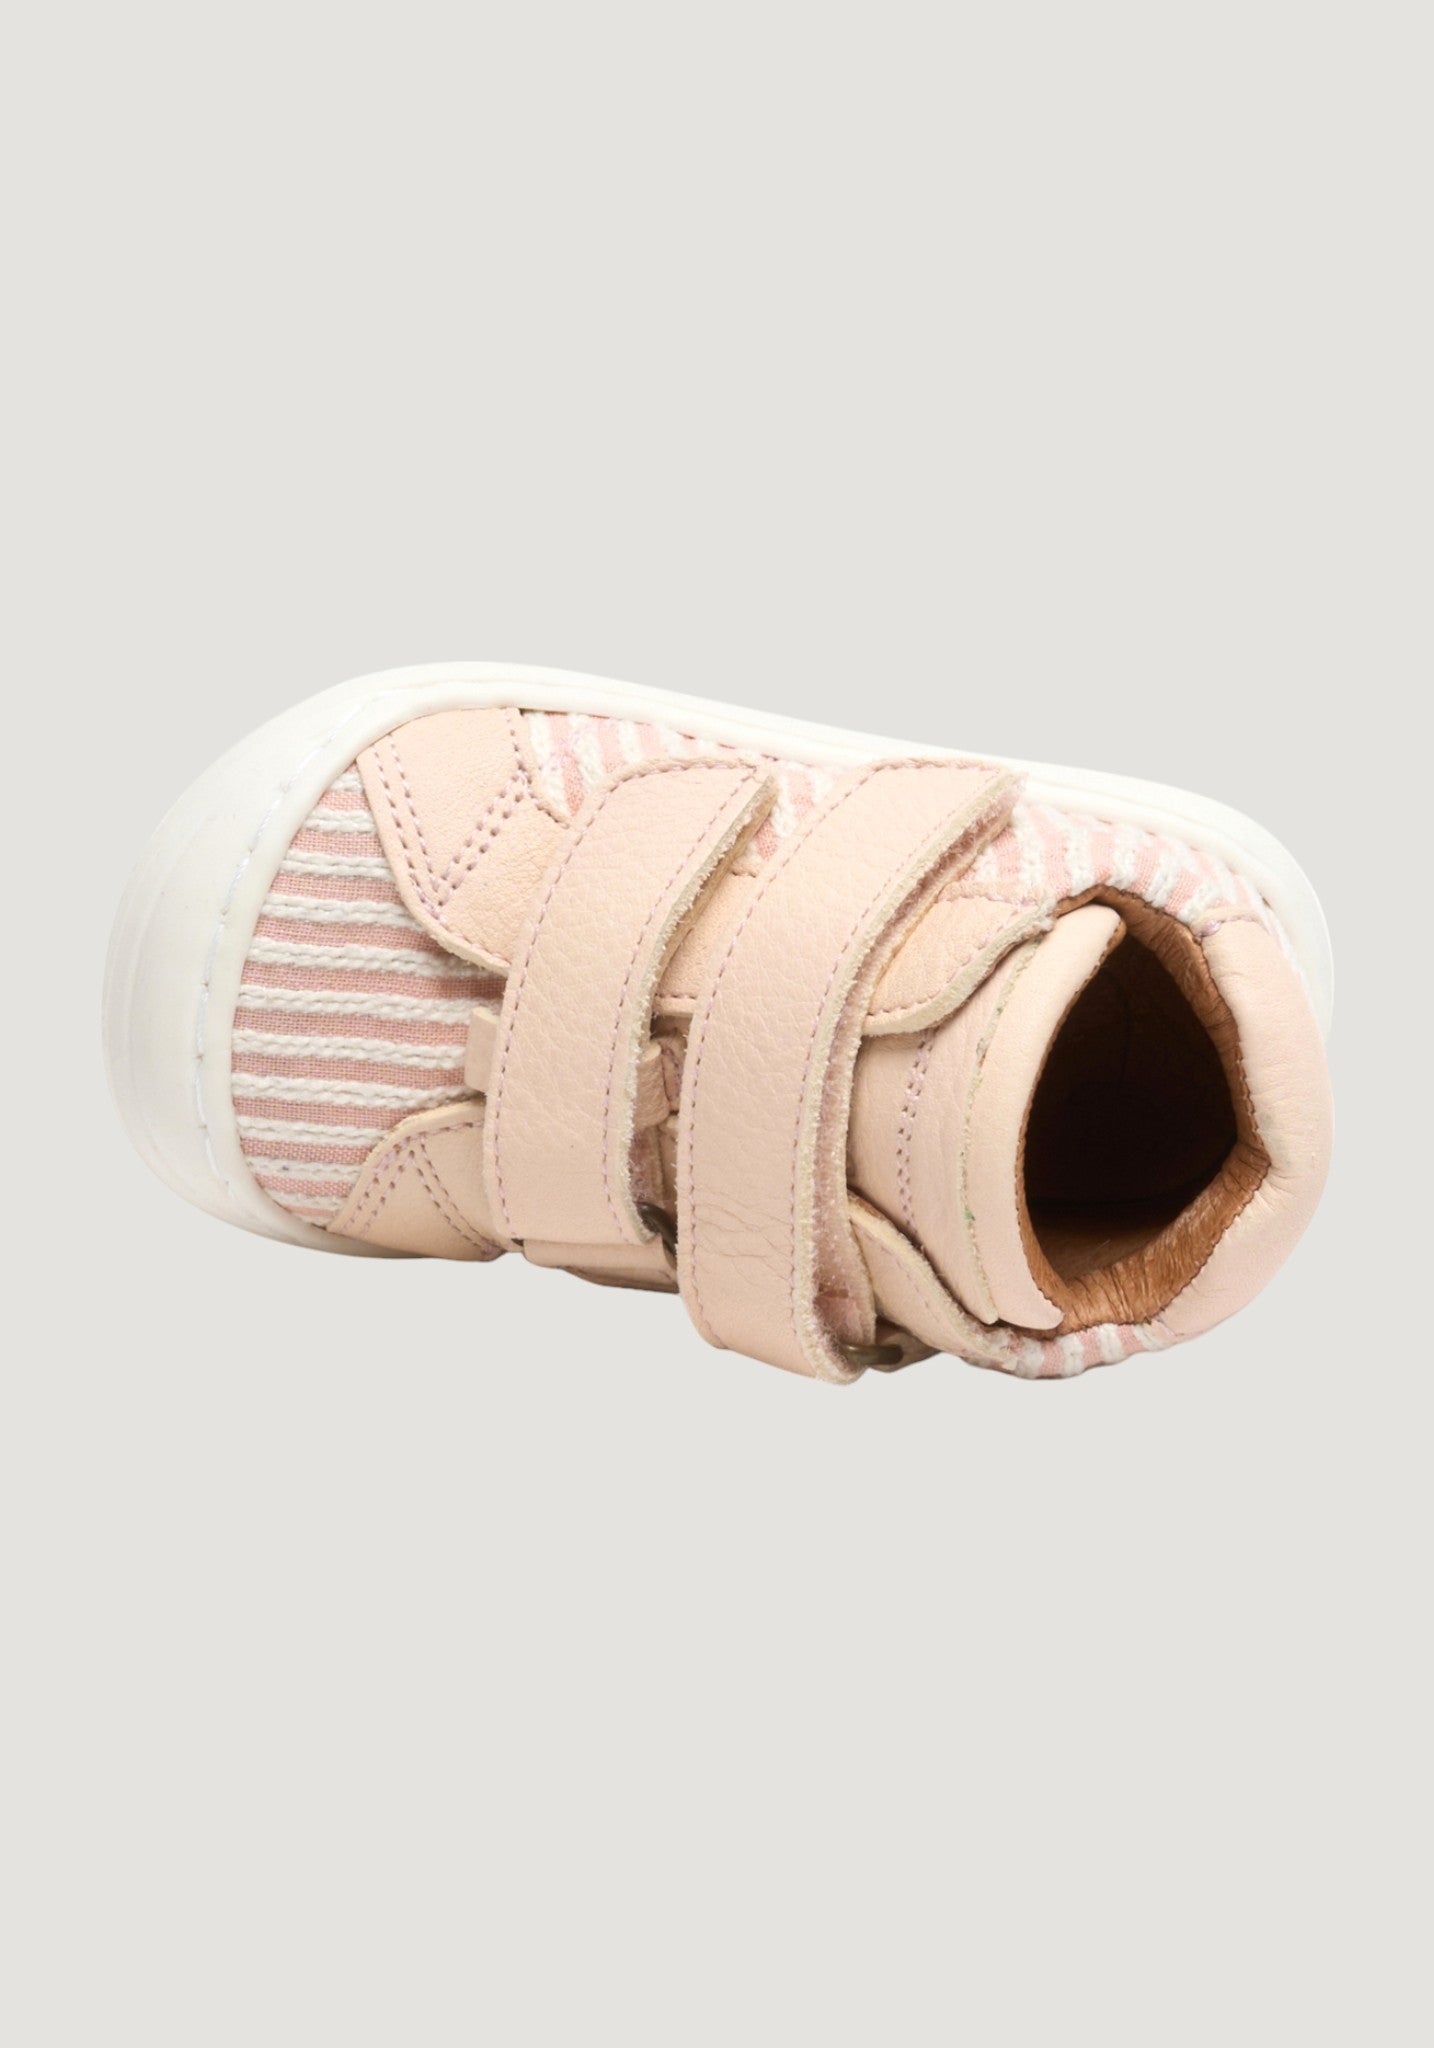 Sneakers First Step - Thor V Rose Stripes Bisgaard HipHip.ro